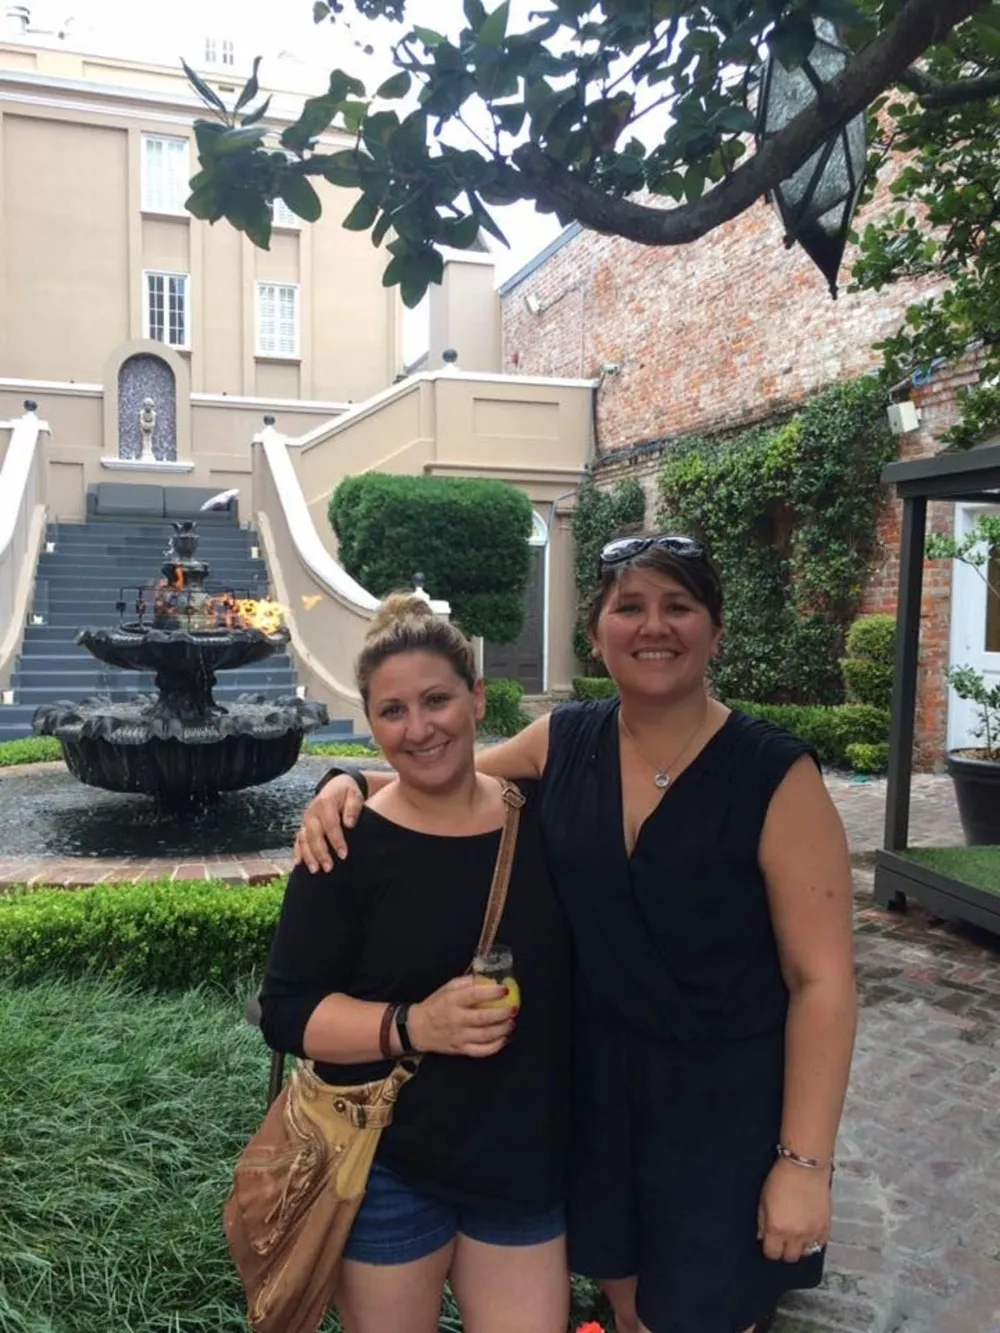 Two smiling women are posing in front of an ornate fountain in a charming courtyard setting with greenery and a classic architectural backdrop